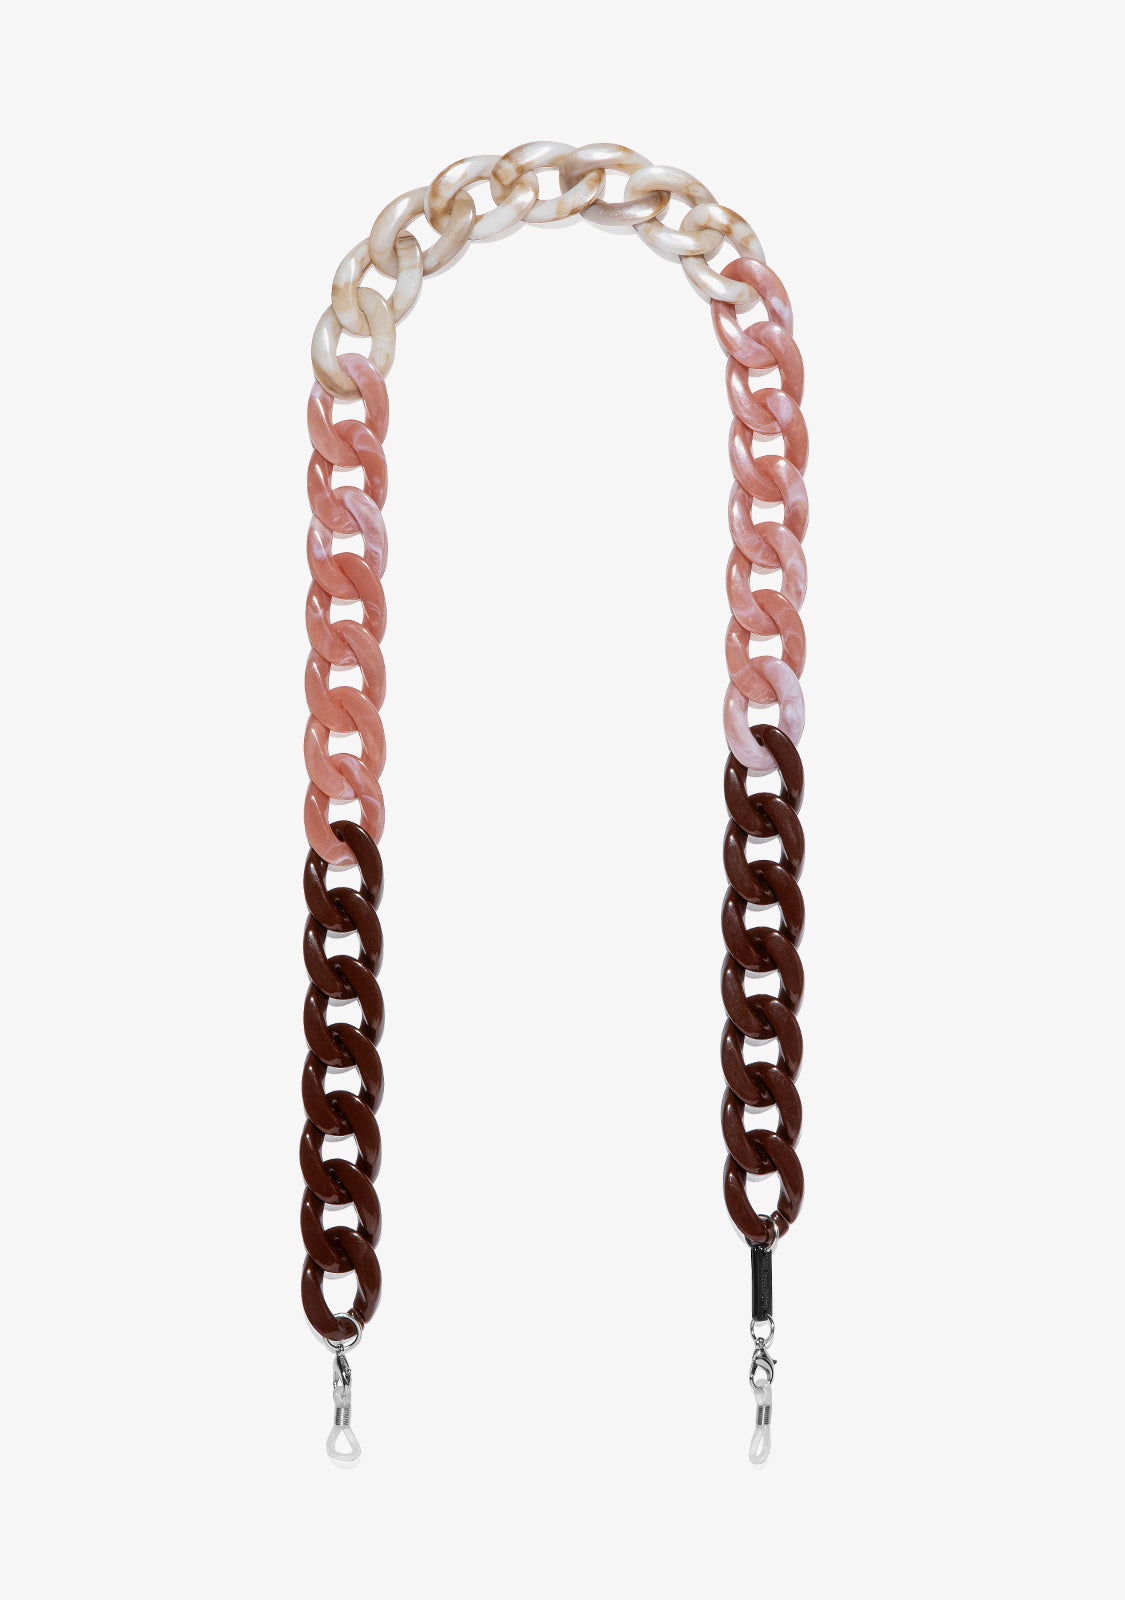 D.Franklin Glasses Cords - Link Chain Brown